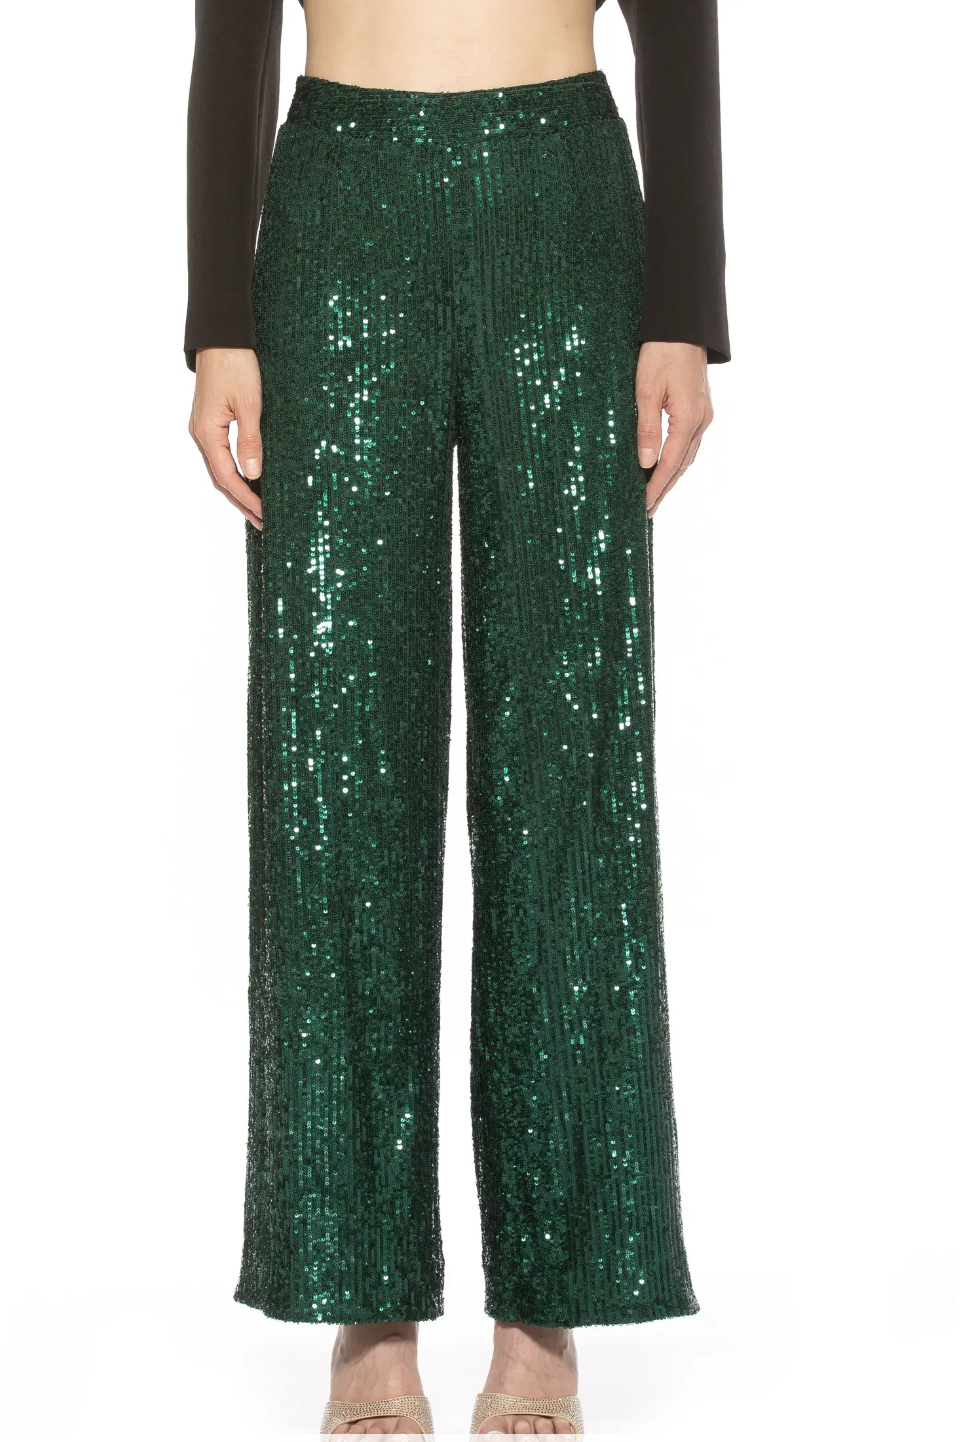 HOLIDAY OUTFIT IDEA WITH SEQUINS PANTS - The Closet Crush